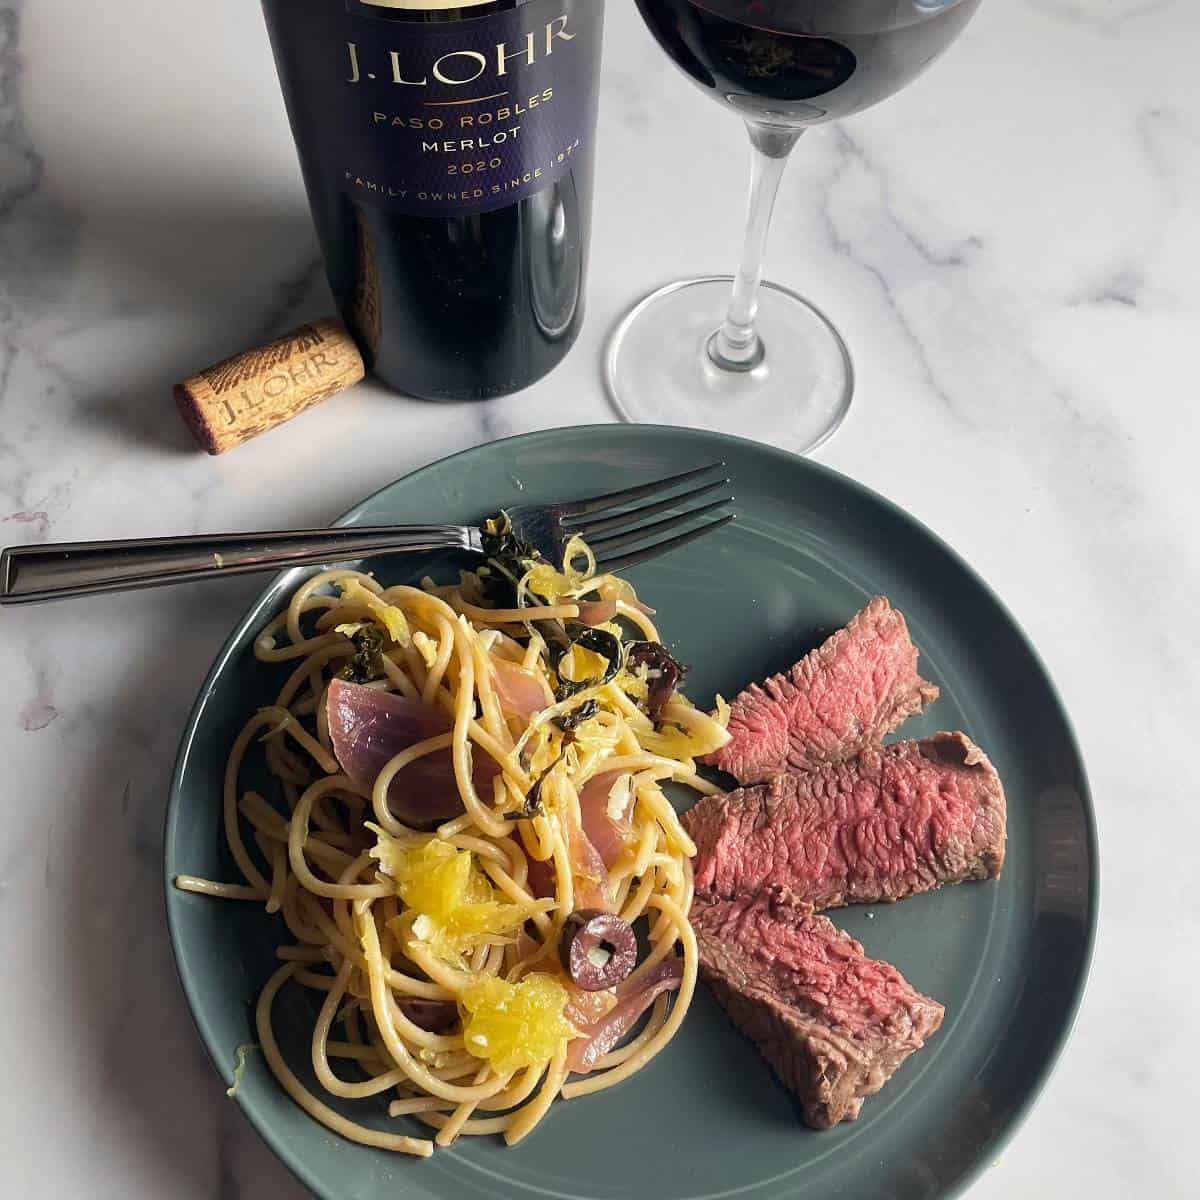 steak plated with a spaghetti side dish and served with a Merlot red wine. 